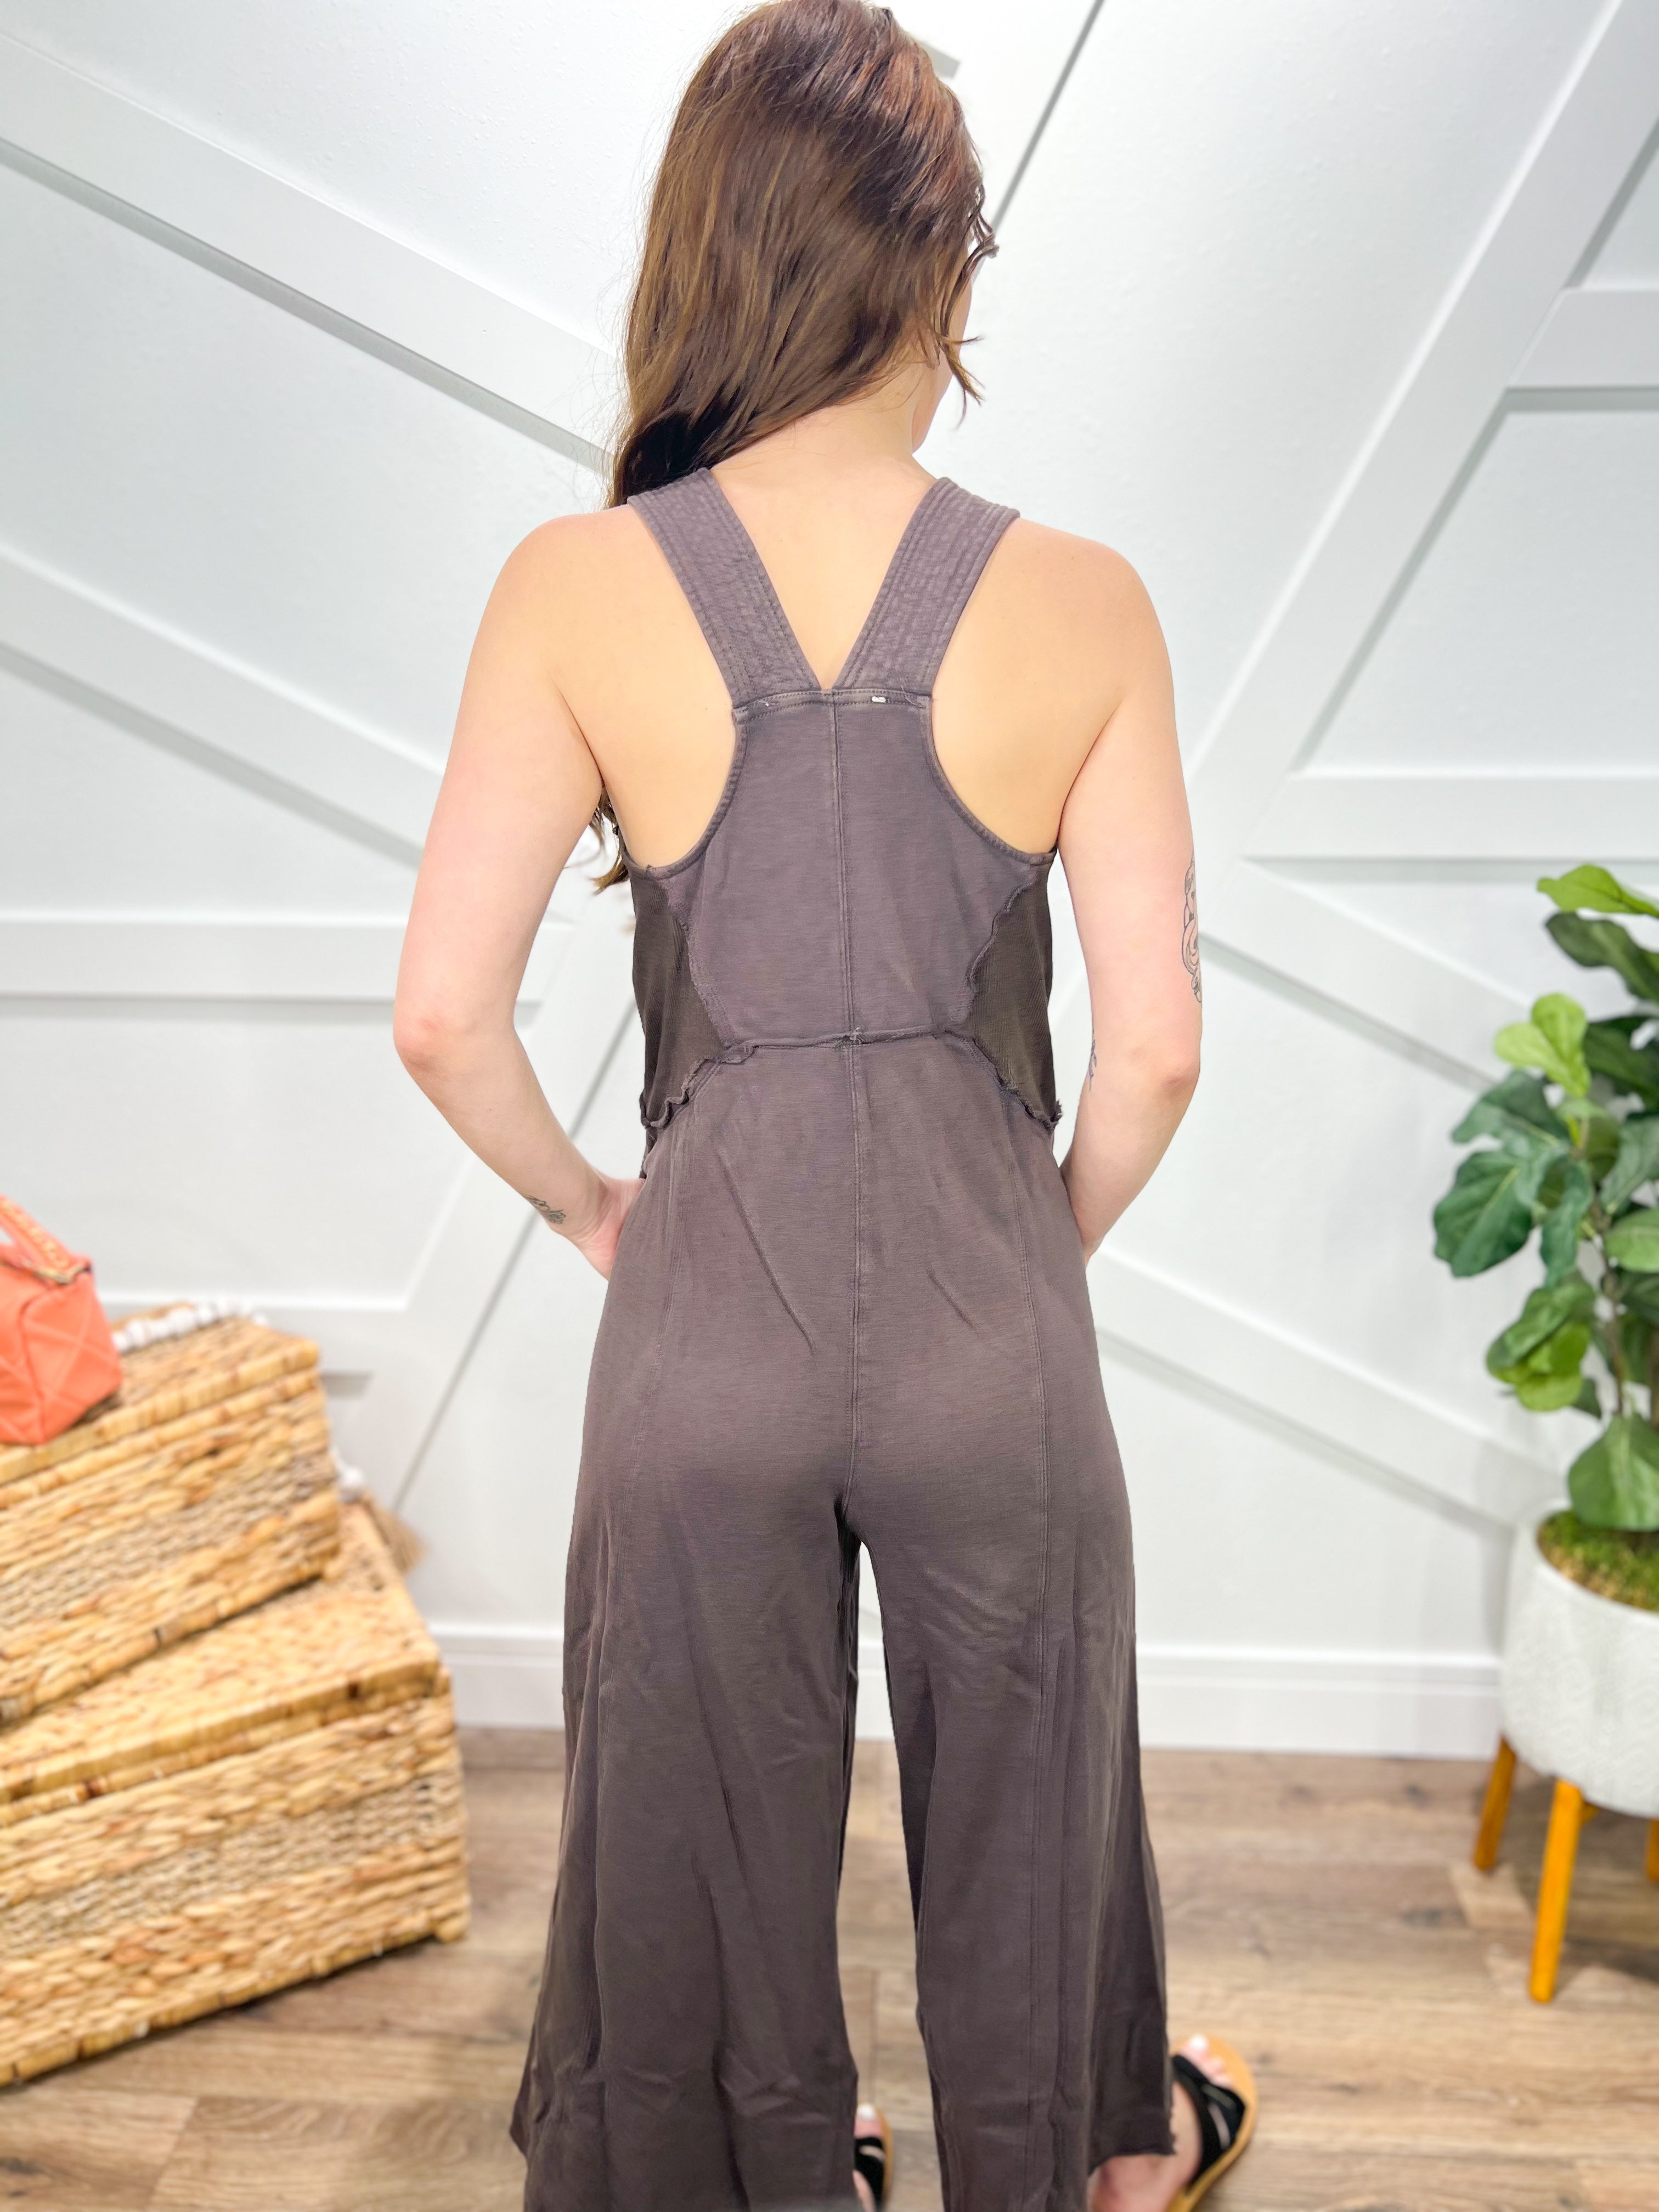 RESTOCK: Breakthrough Jumpsuit-230 Dresses/Jumpsuits/Rompers-BlueVelvet-Heathered Boho Boutique, Women's Fashion and Accessories in Palmetto, FL